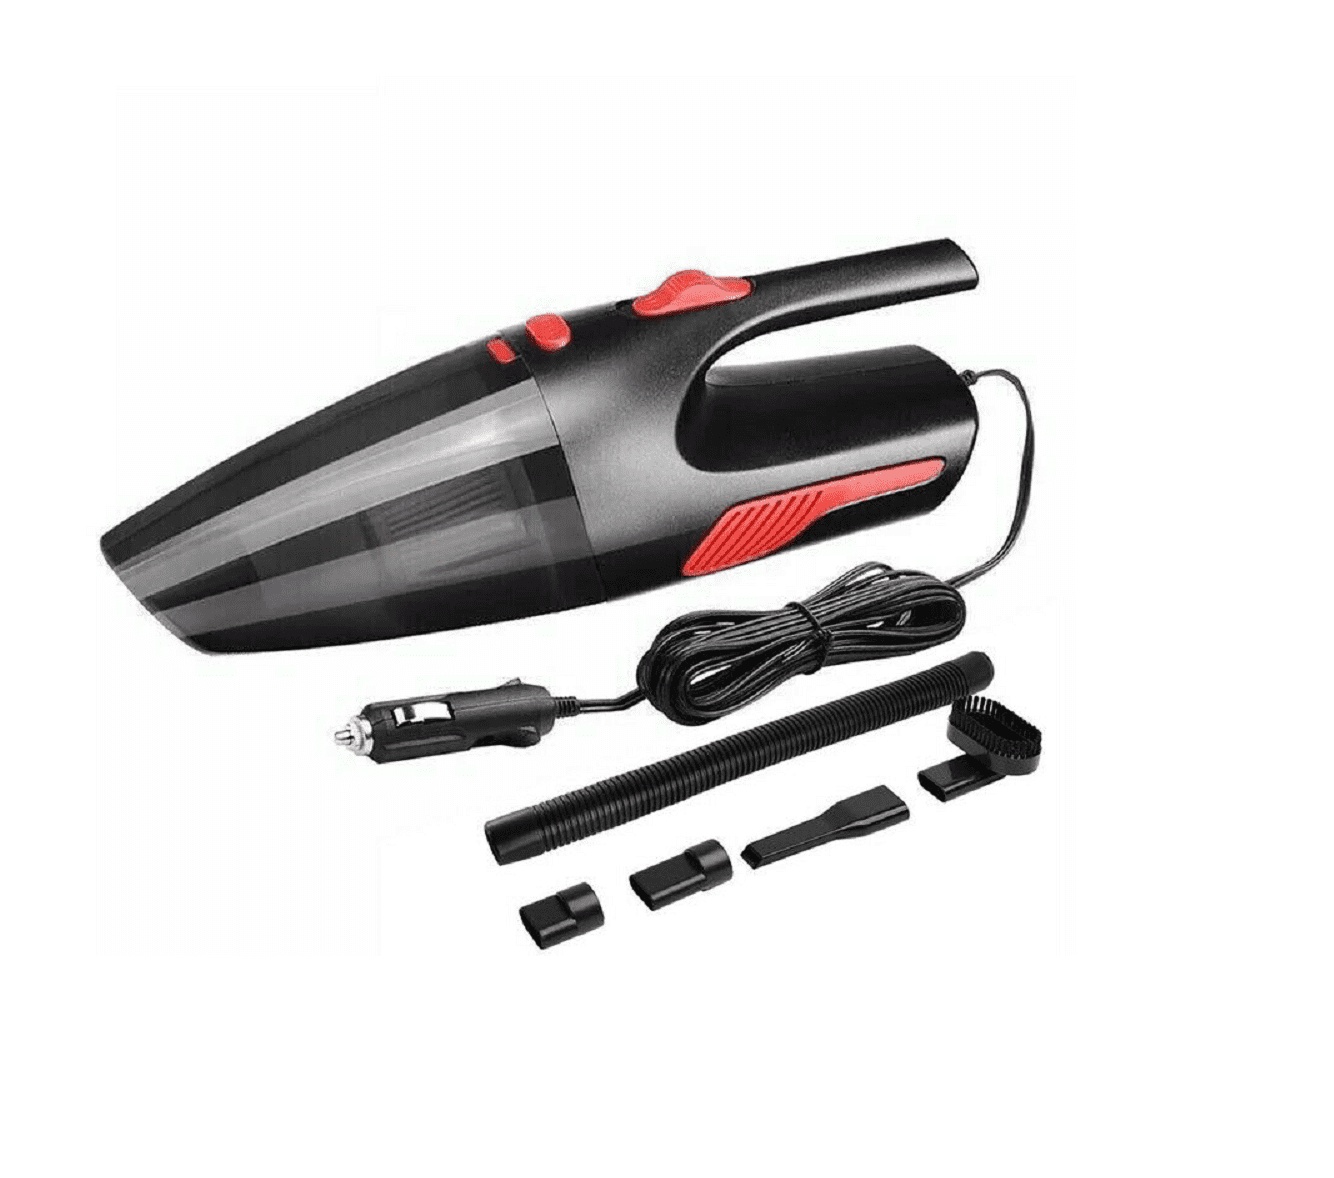 Car Vacuum Cleaner 12V 120W For Auto Home Mini Portable Dry Wet Handheld Duster